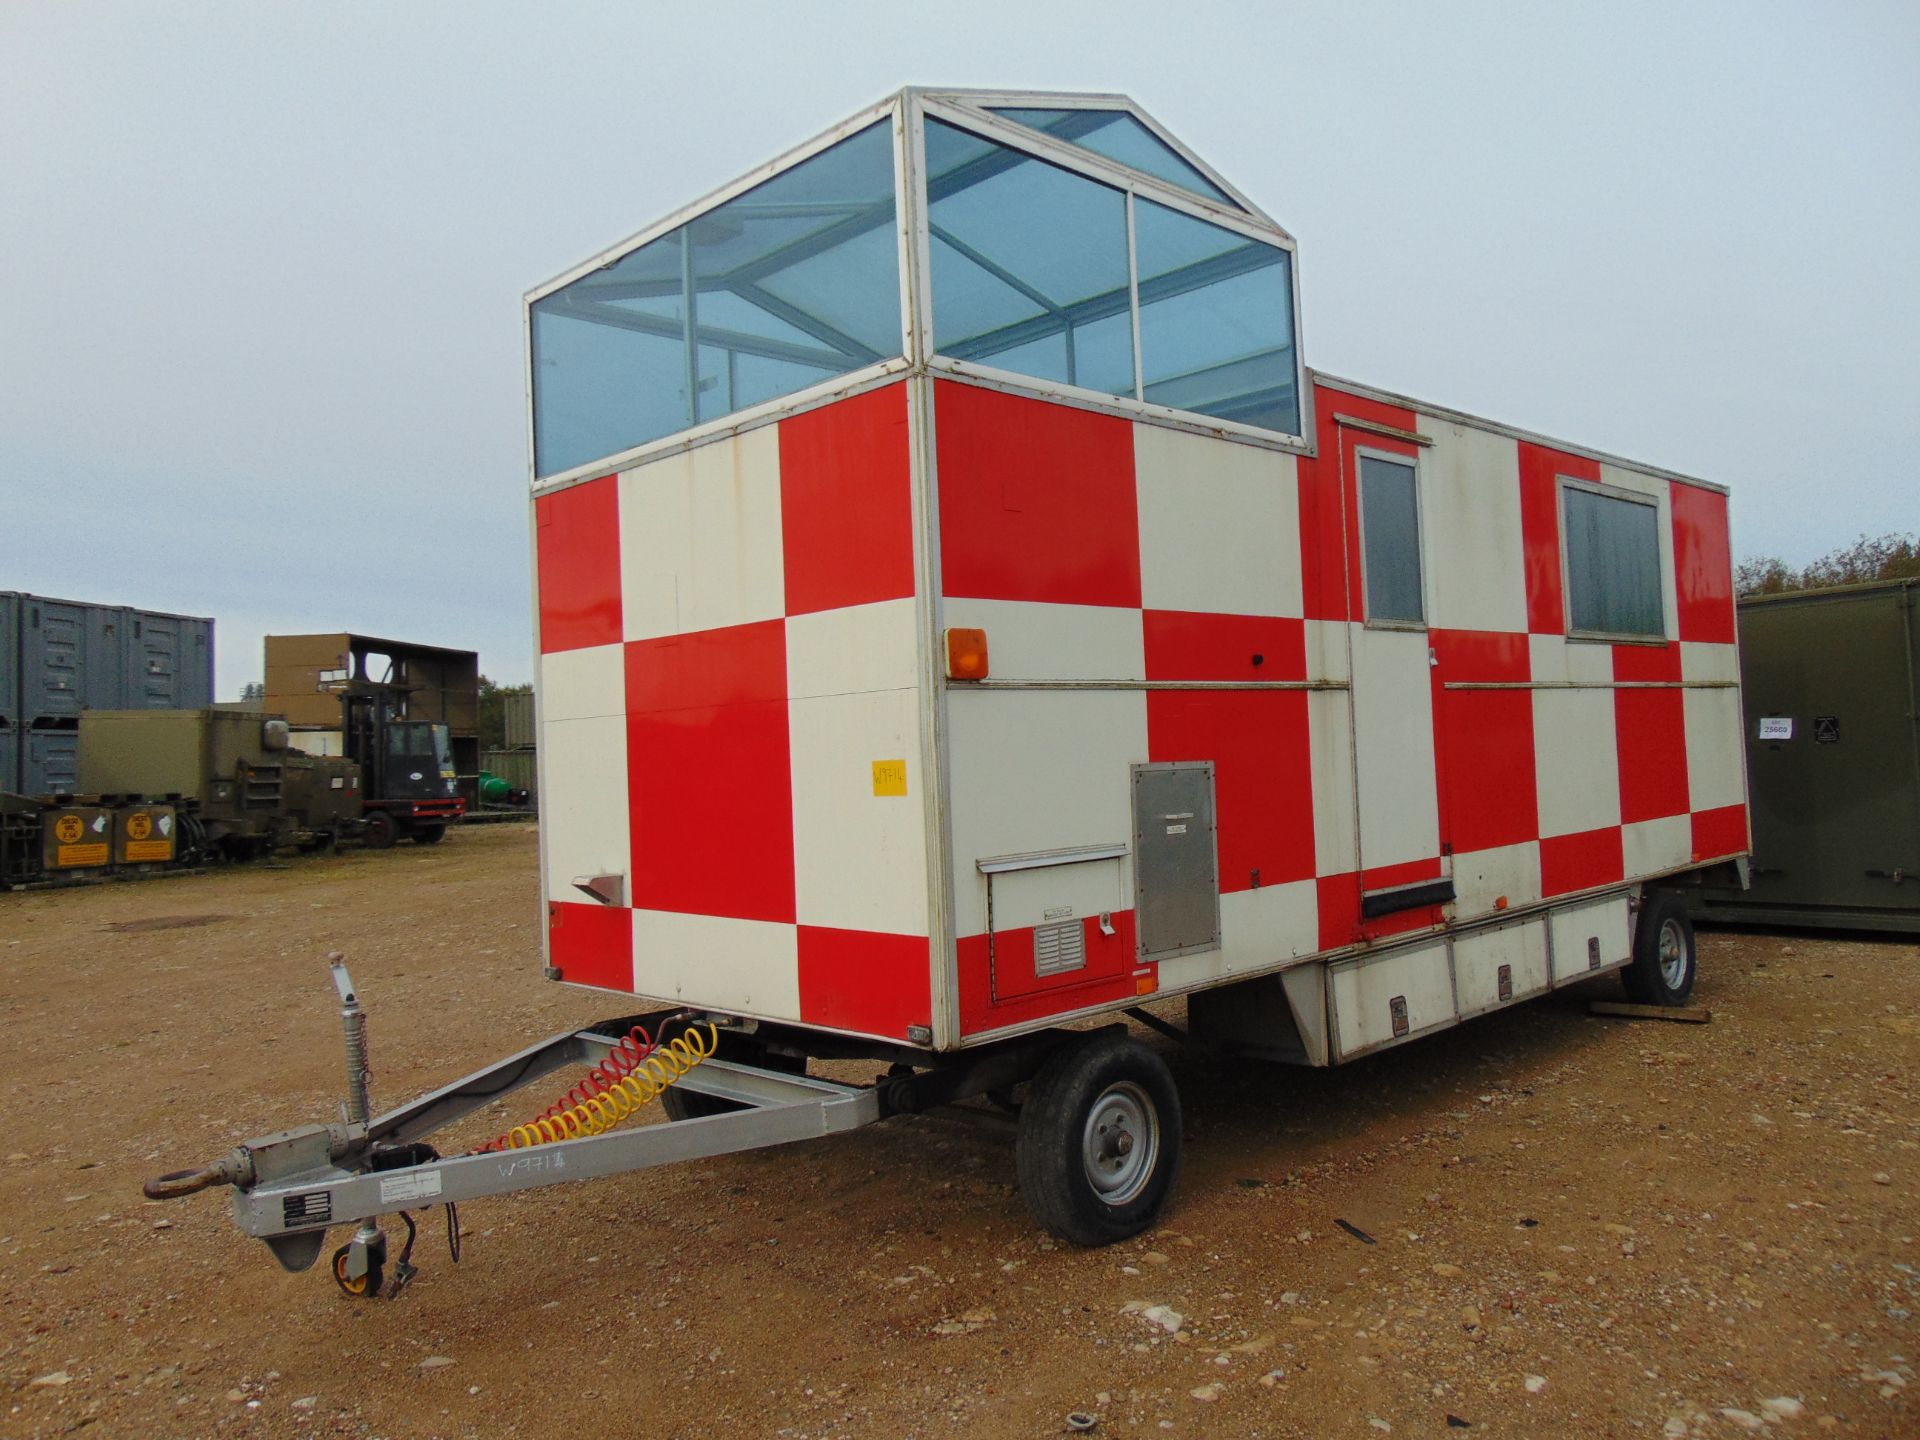 Ex Royal Air Force Mobile Observation and Command Centre - Image 3 of 21